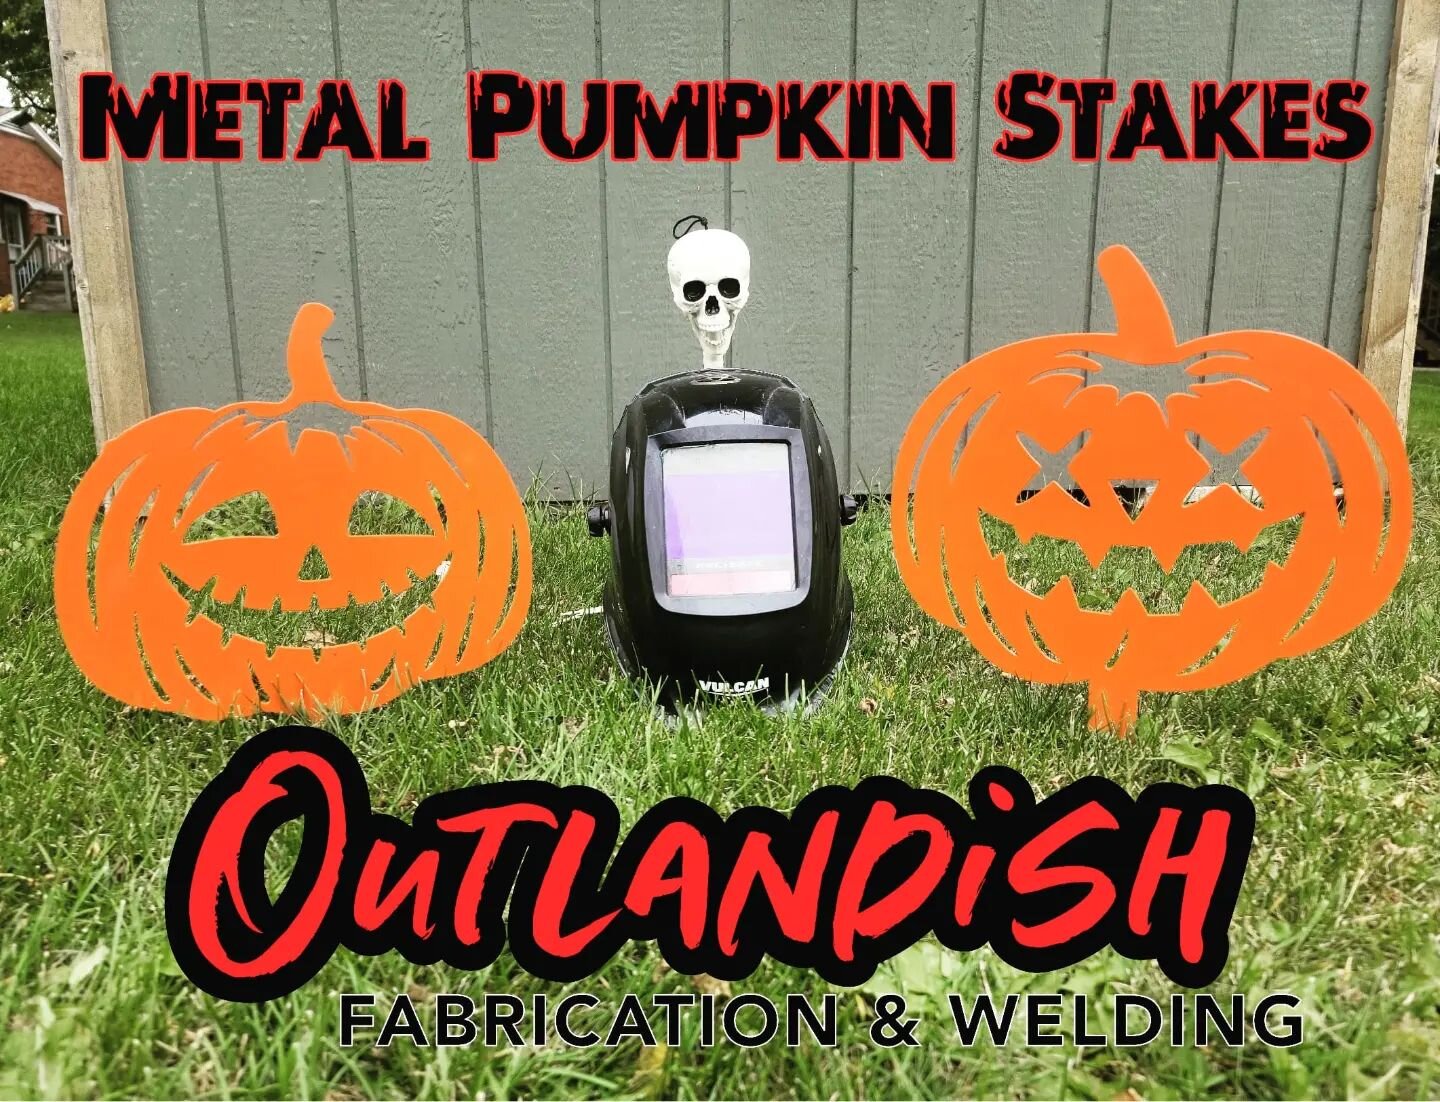 Buy your set of metal Halloween pumpkin stakes before they're sold out!